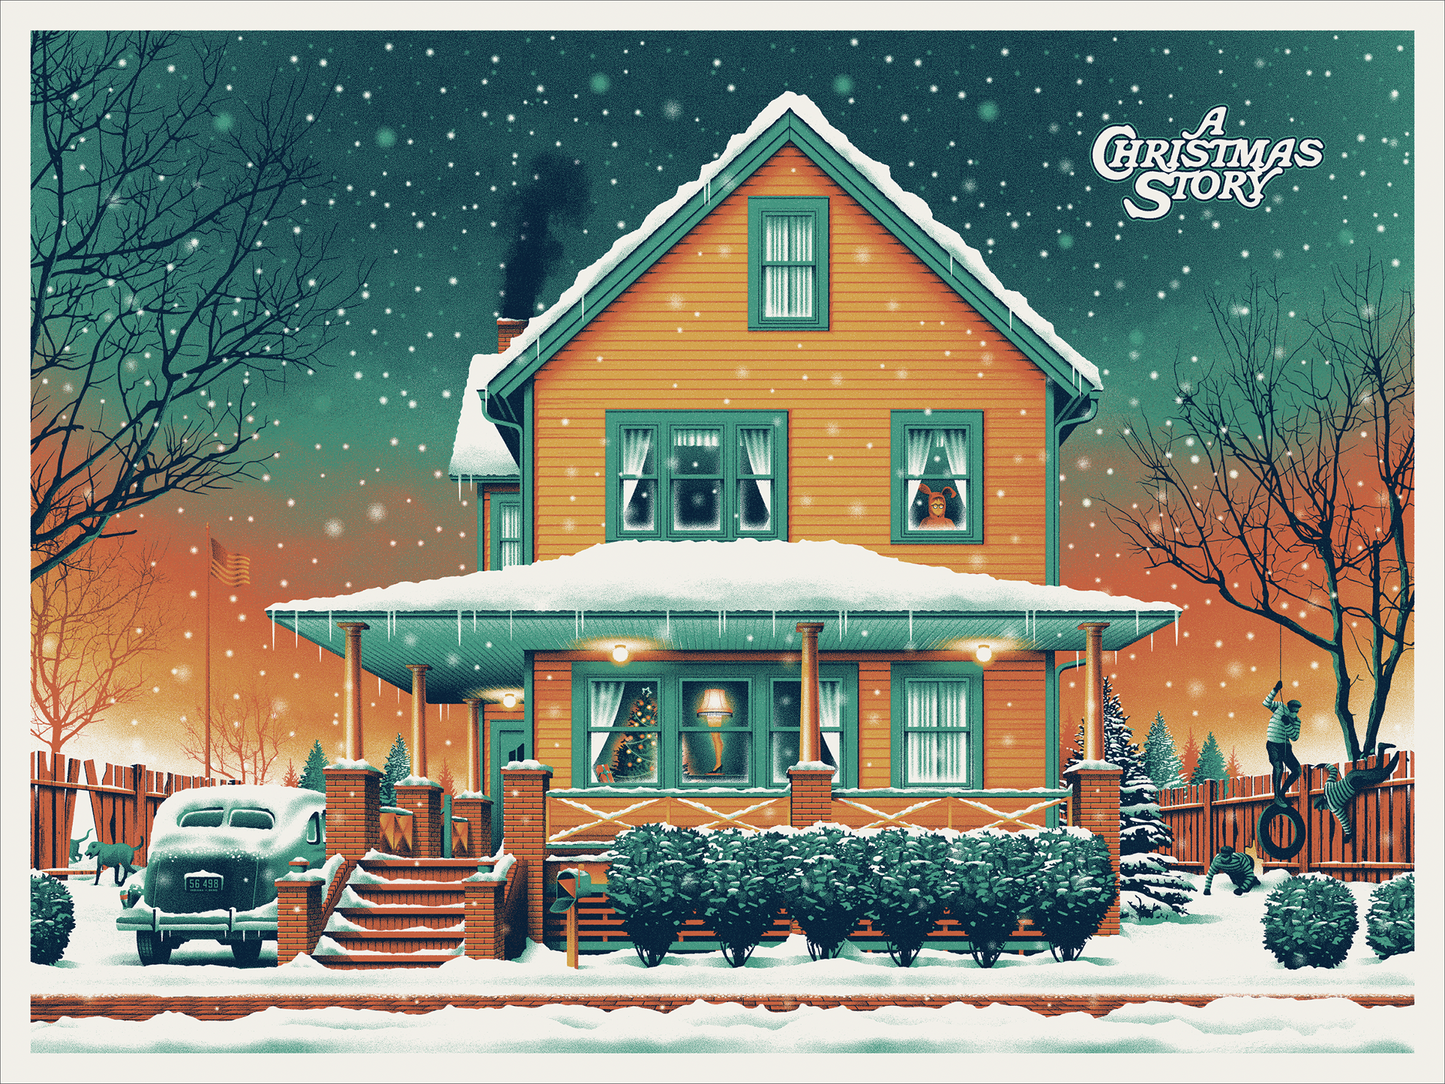 DKNG "A Christmas Story" Charity Print